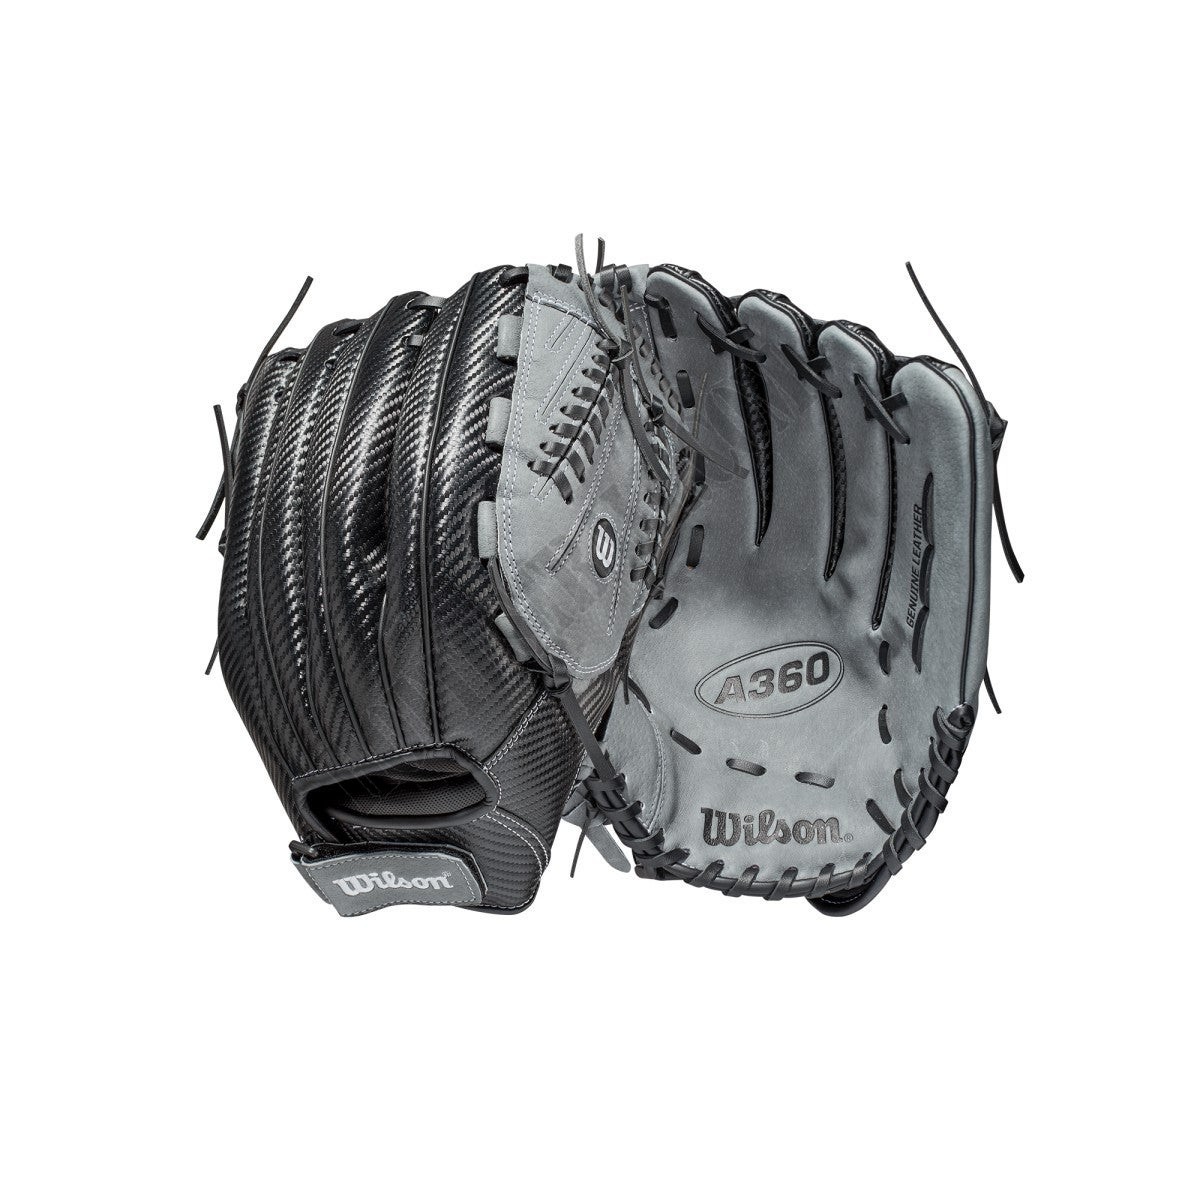 2021 A360 SP13 13" Slowpitch Softball Glove ● Wilson Promotions - -0